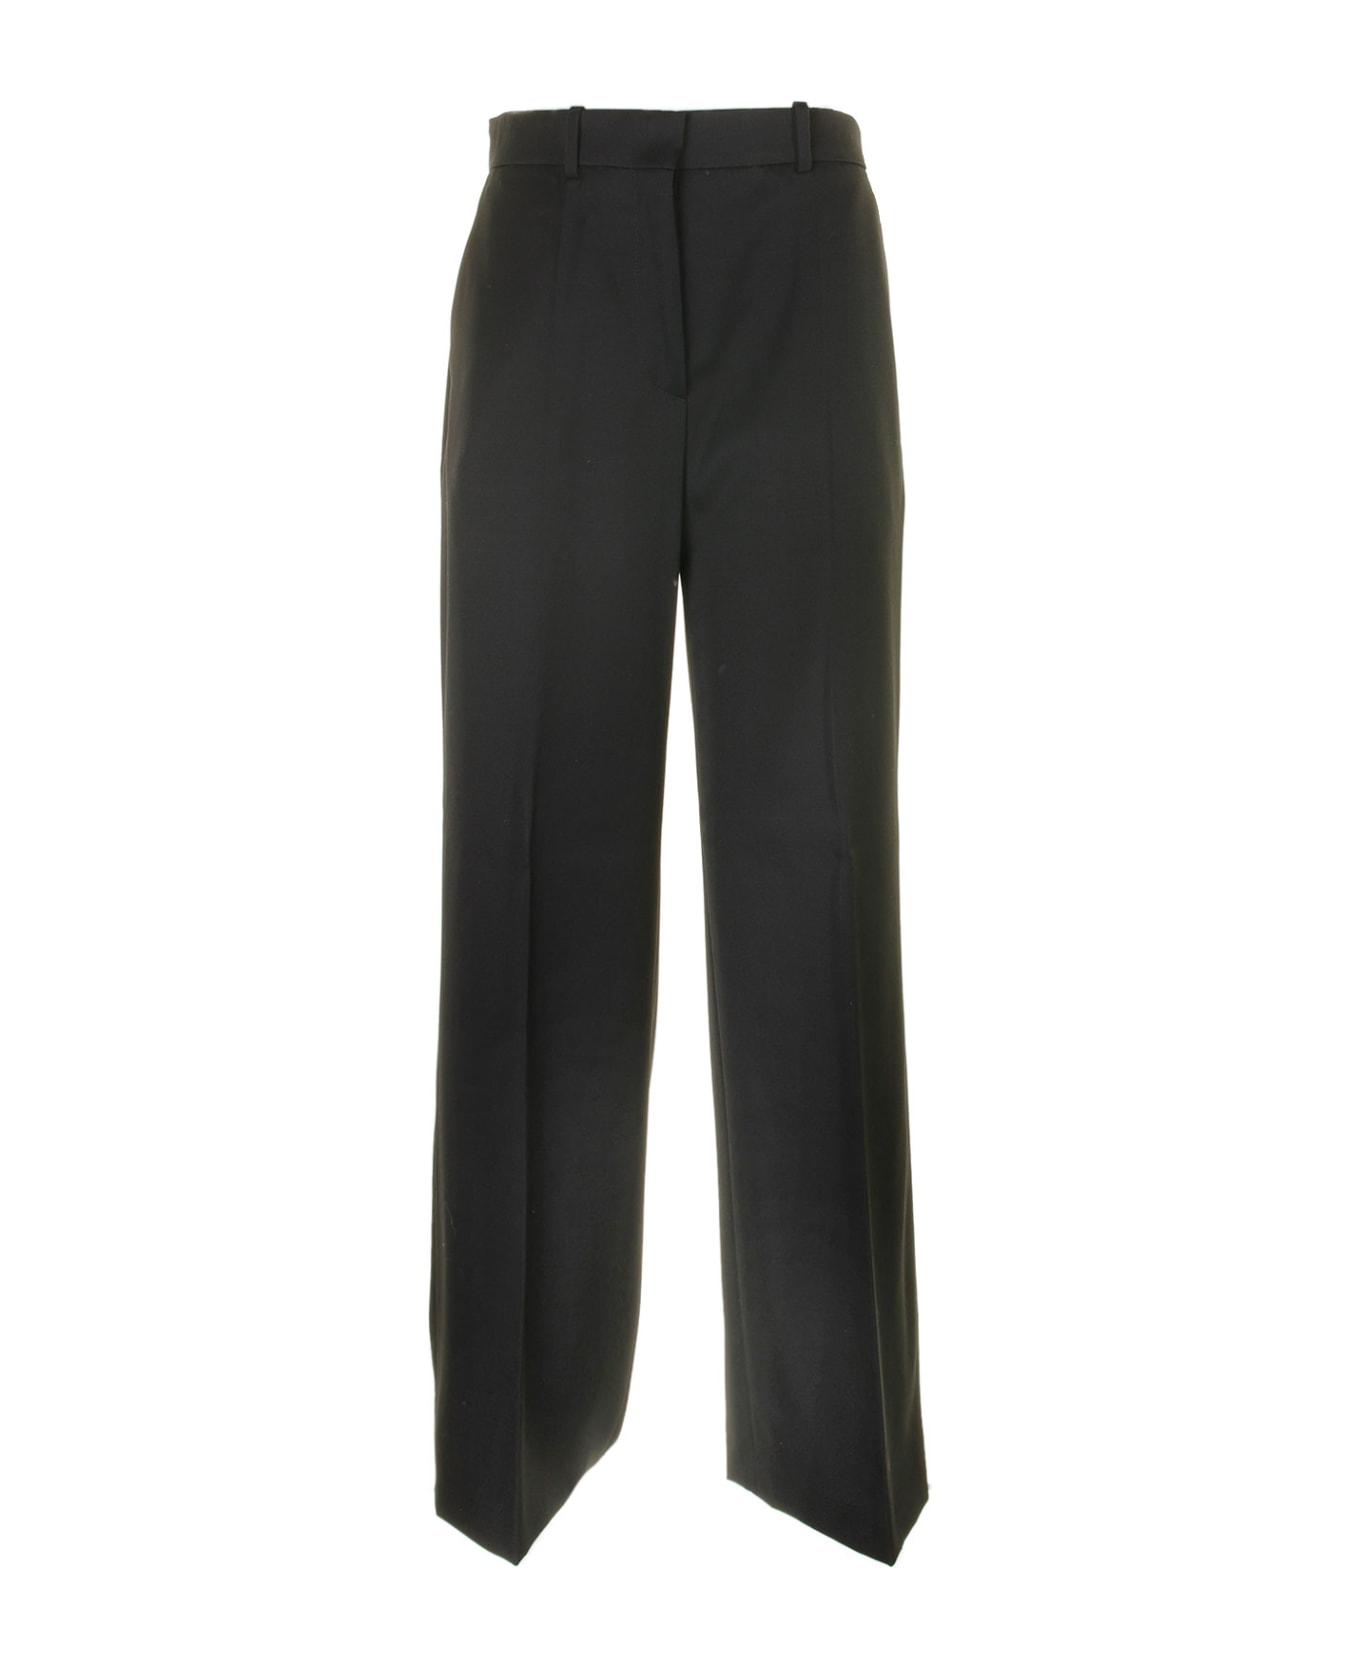 Lanvin High-waisted Wool Trousers - BLACK ボトムス